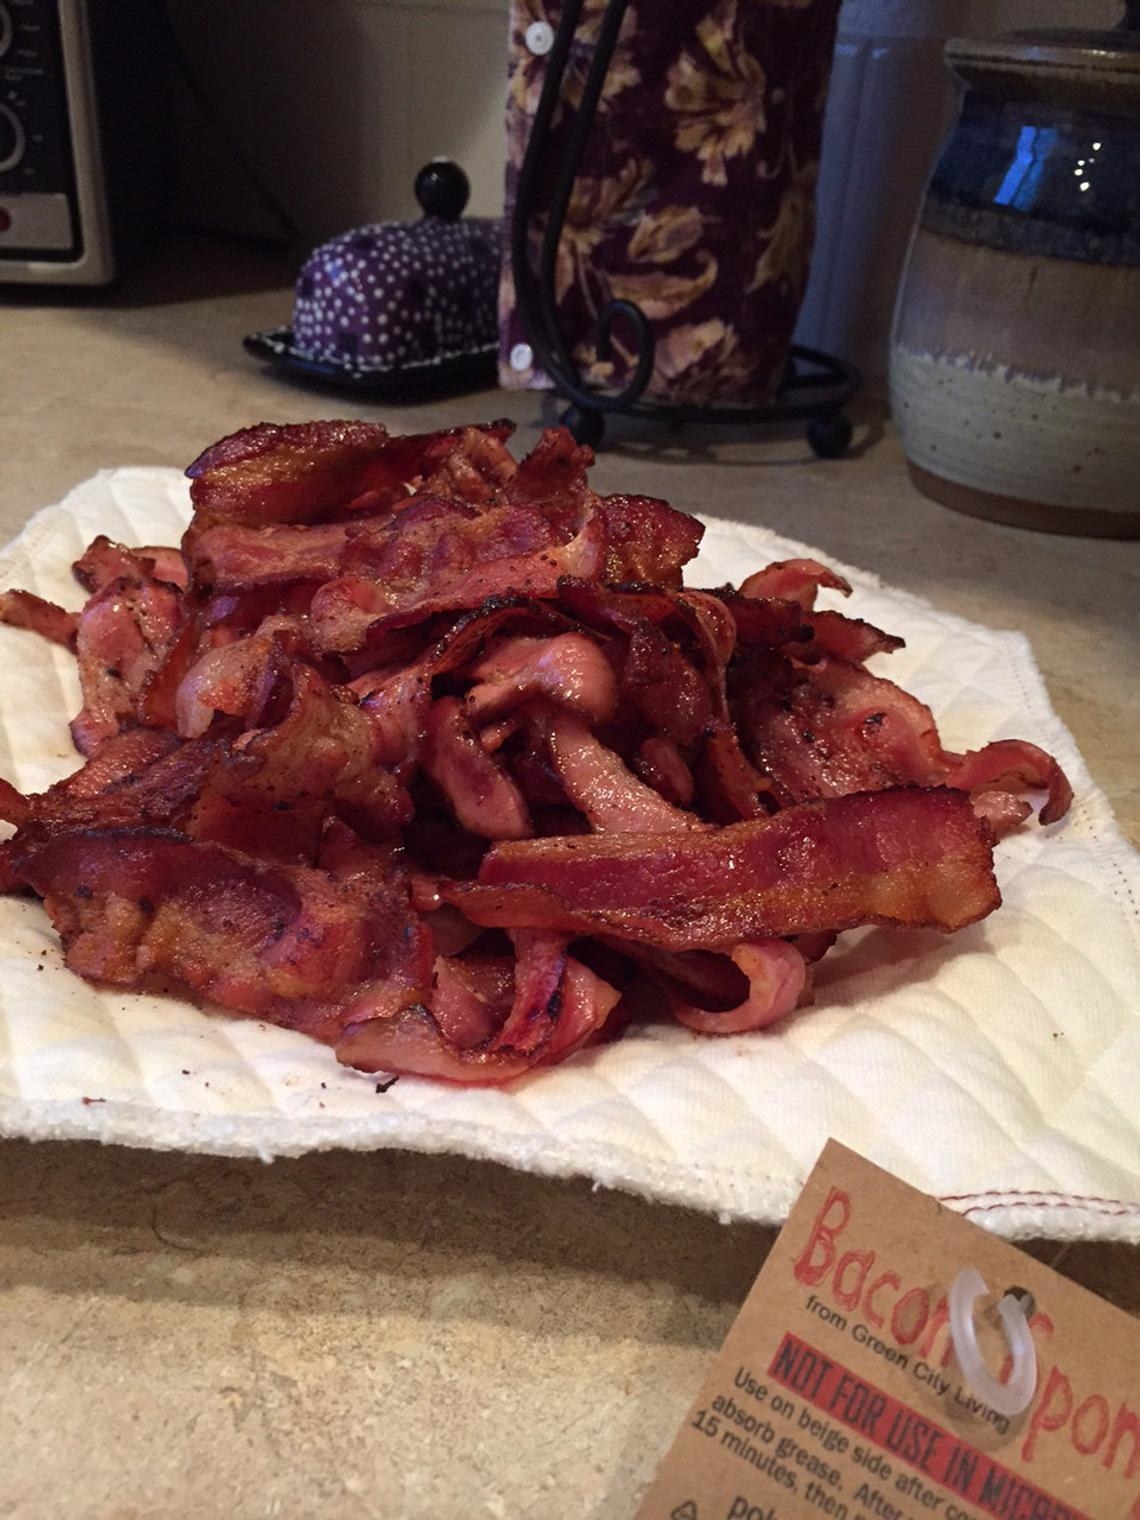 a pile of bacon on the reusable towel